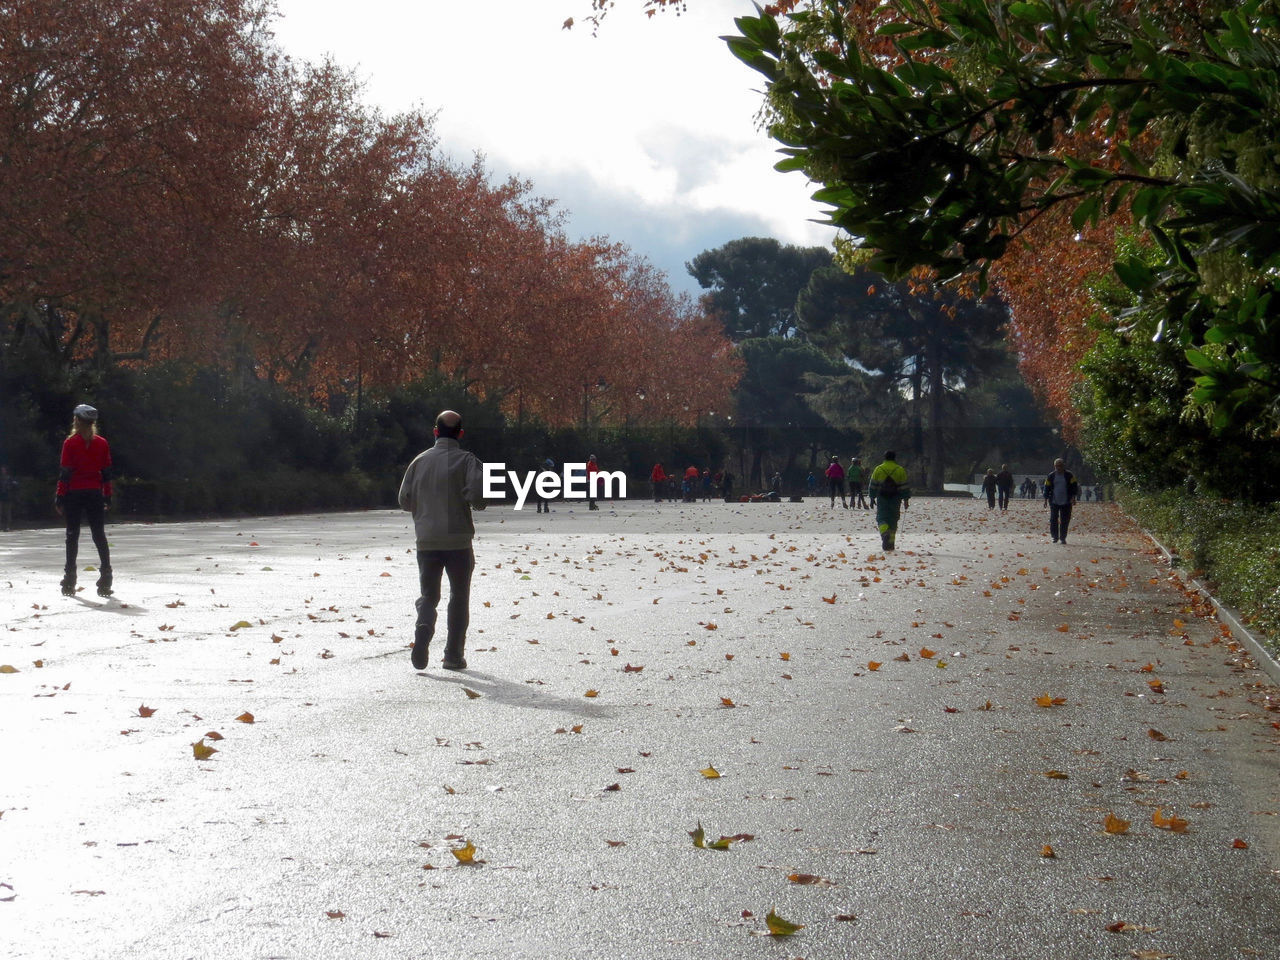 City Life Day Fallen Leaves Lifestyles Outdoor Activities Outdoors Real People Silver Lights Tree Urban Park Walking